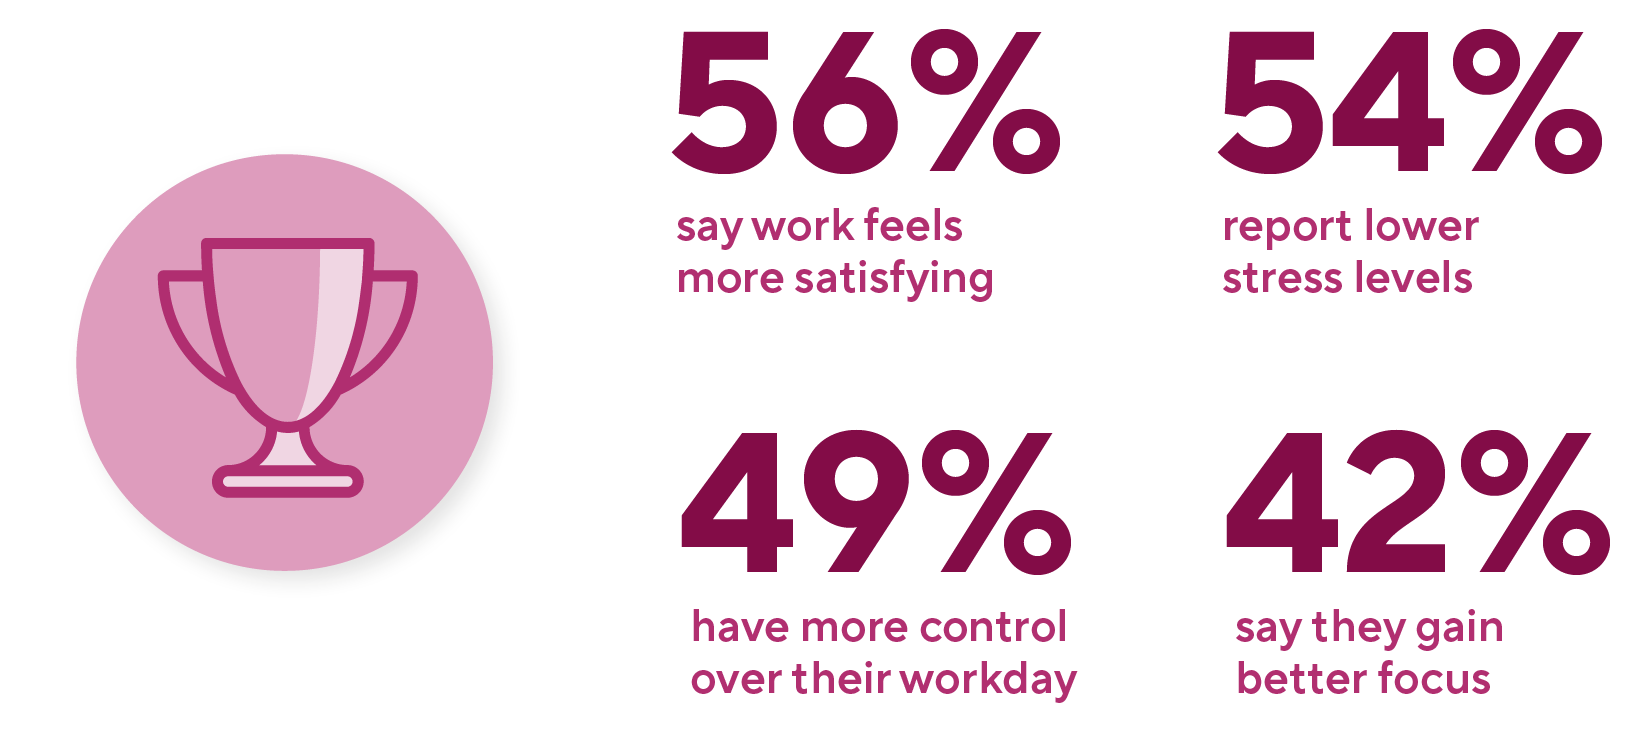 Infographic - 56% say work feels more satisfying, 54% report lower stress levels, 49% have more control over their workday, 42% say they gain better focus